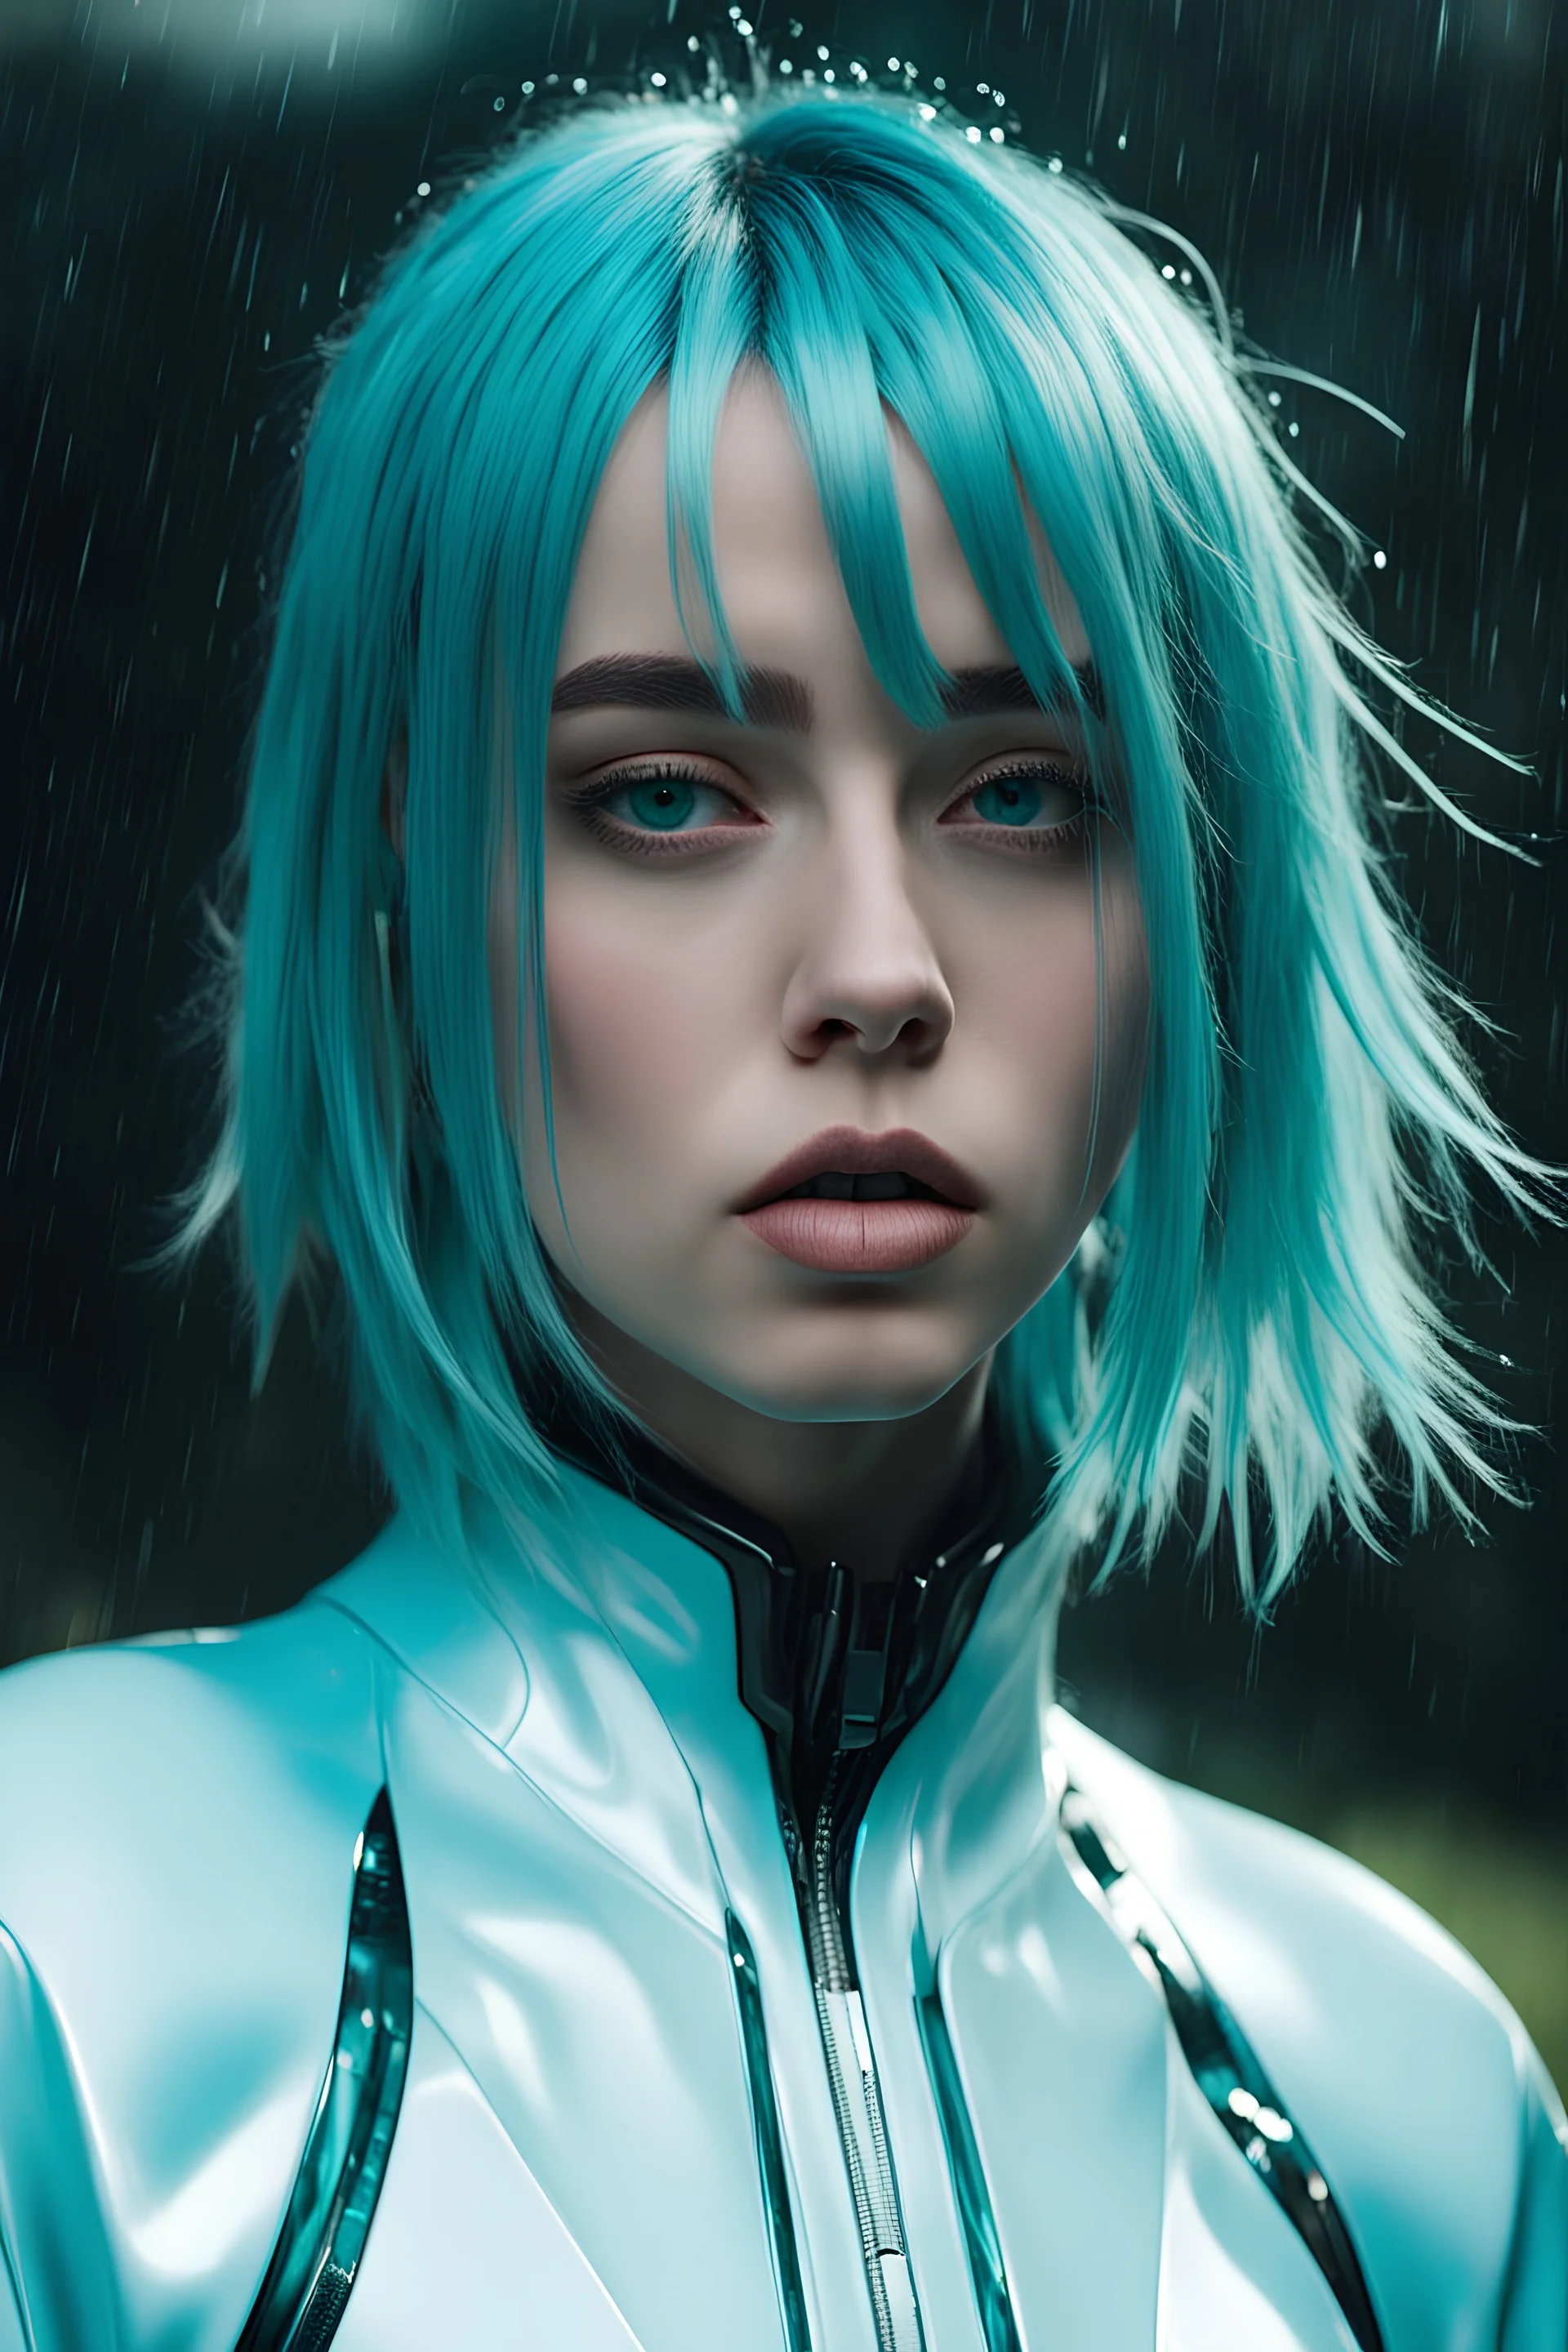 photo, billie eilish, she wears gloss white evangelion plugsuit, she has short sleek teal hair, she has a crazed expression, dark and lit only by underlighting, running water, rivulets, rain,